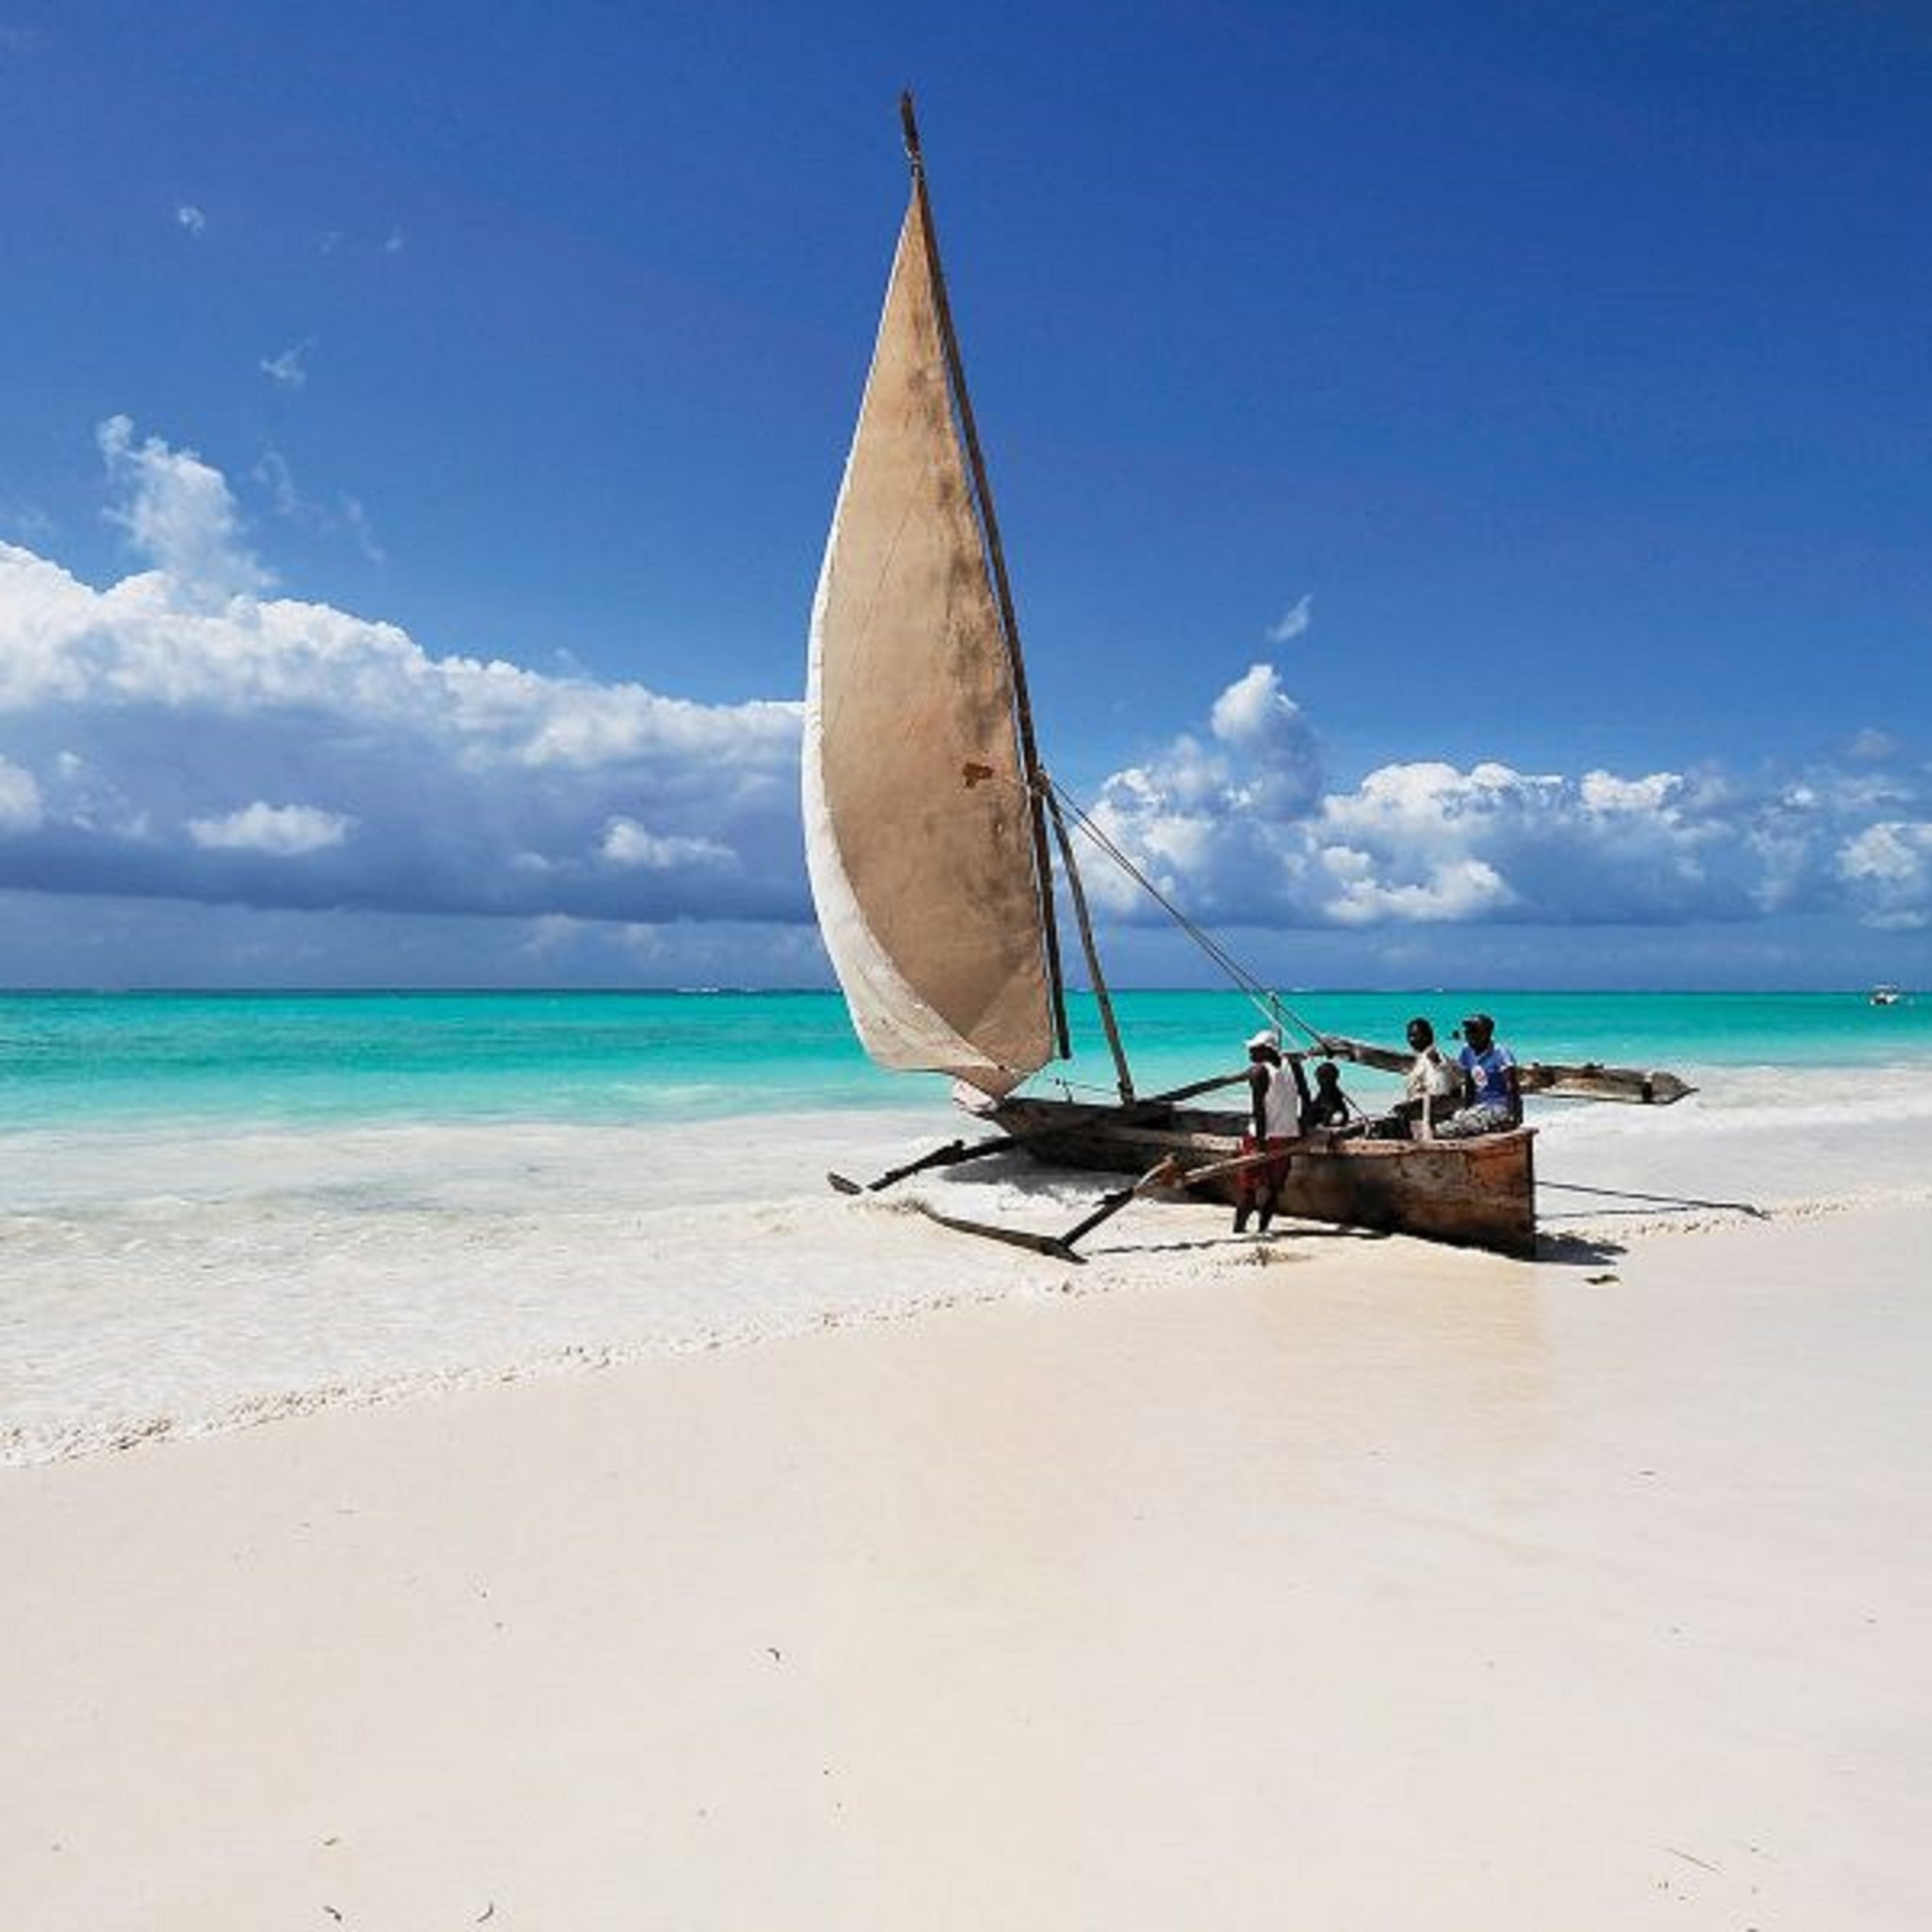 Leave the cold winter behind on this Dubai and Zanzibar twin centre